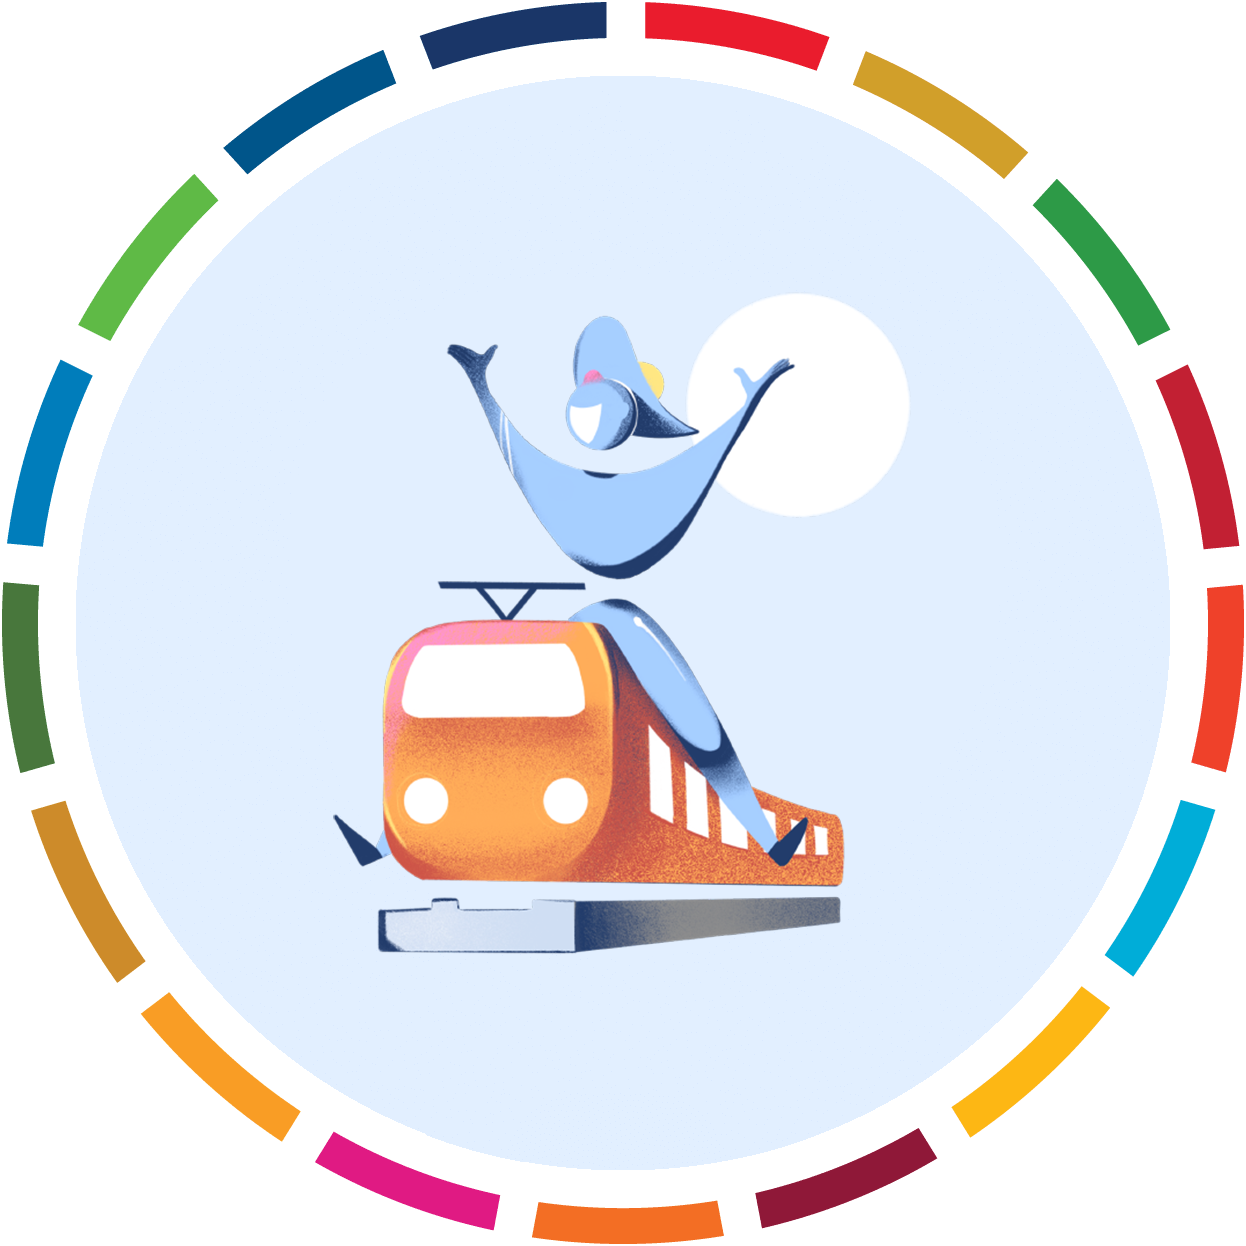 Photocomposition: a train with a person on the top of it, smiling, celebrating